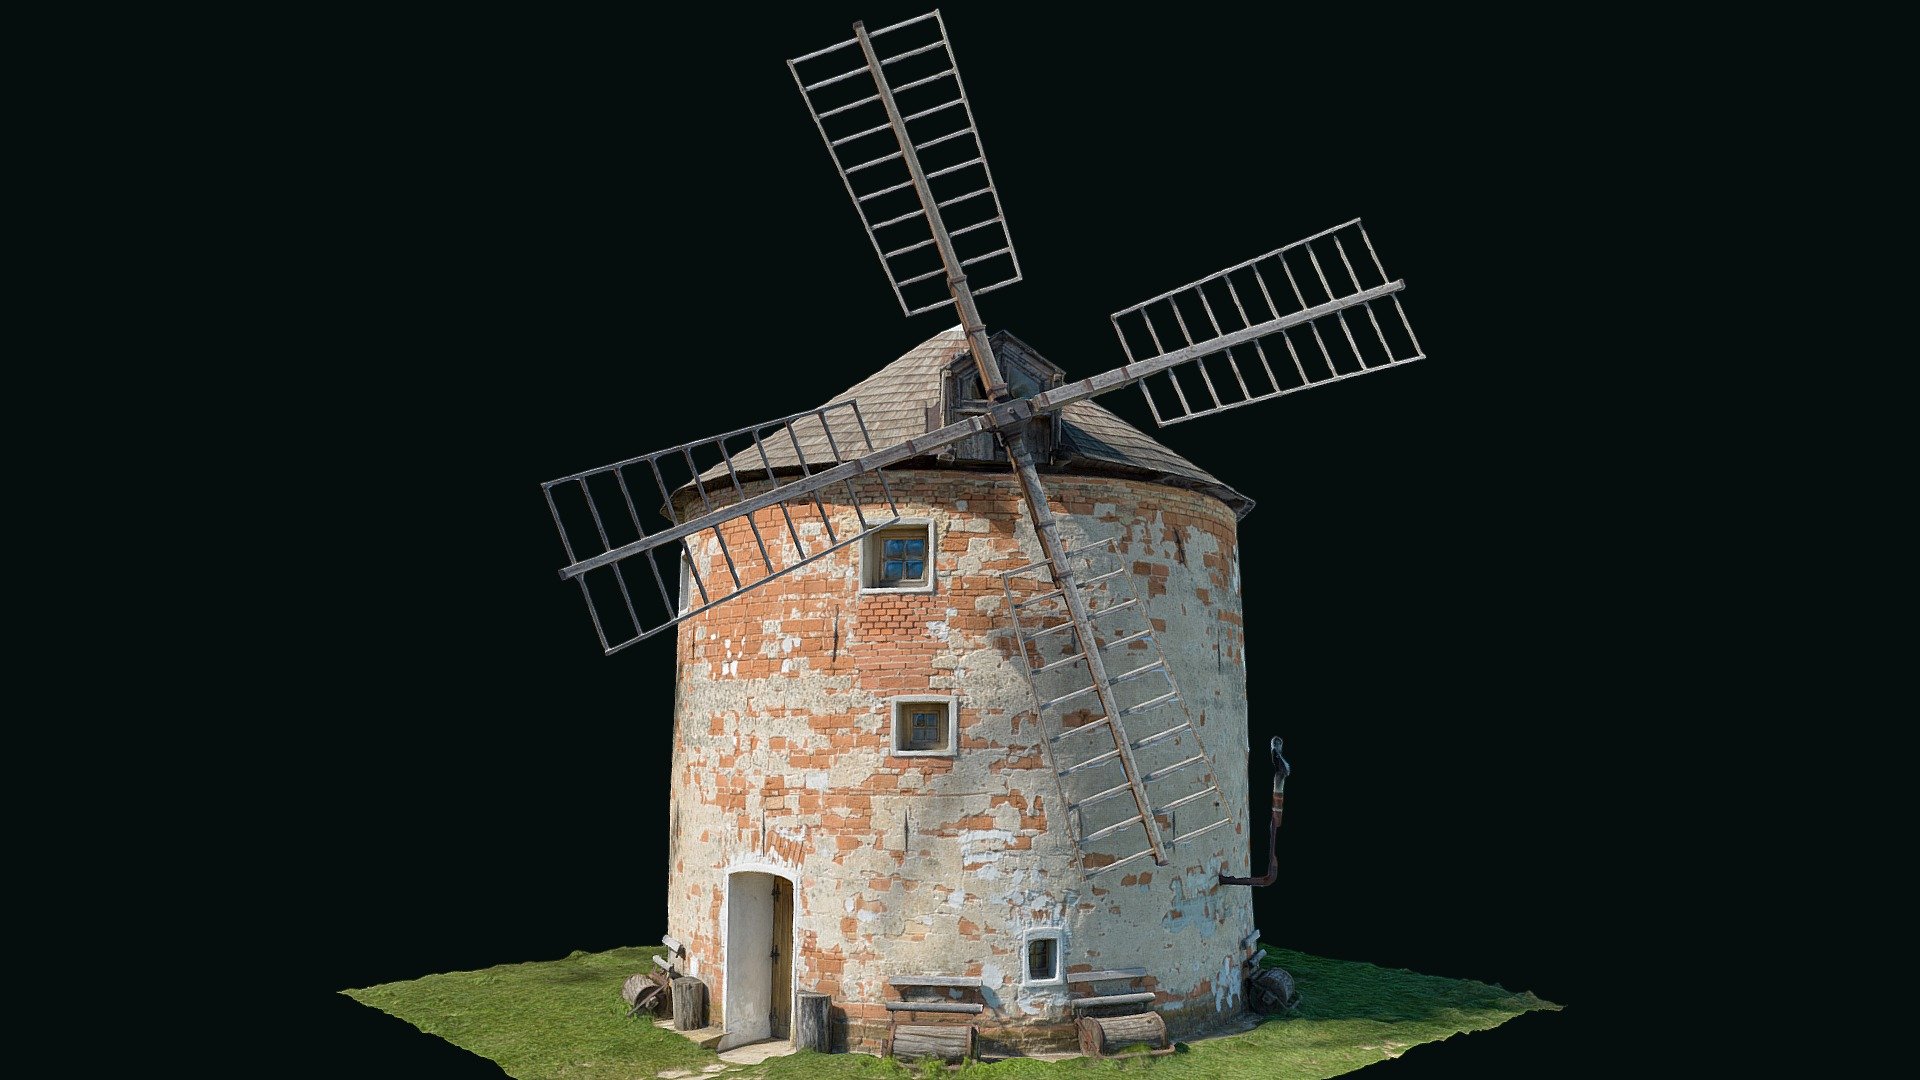 Sometime wide wings of windmills decorated and dominated the landscape. Standing away from the settlements, they looked lonely but powerful, welcoming the wind with all their might.

Kunkovice windmill 
Lat: 49.183990
Long: 17.171680
Czech Republic

Photogrammetry reconstruction in RealityCapture from 455 images. © Saulius Zaura www.dronepartner.lt 2023 - Kunkovice windmill (cut) - 3D model by Saulius.Zaura 3d model